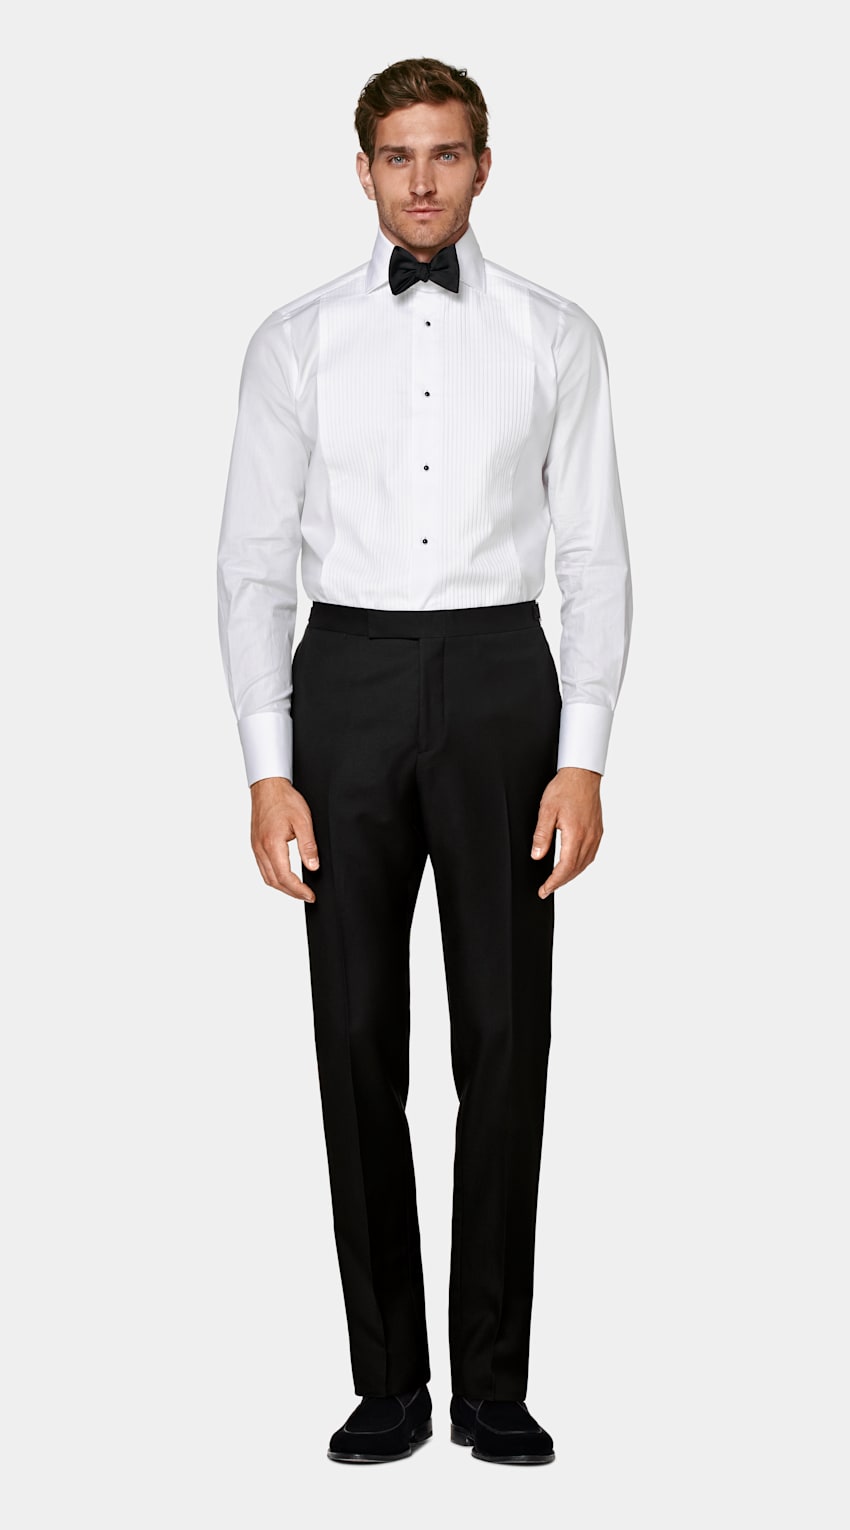 SUITSUPPLY Egyptian Cotton by Tessitura Monti, Italy White Pleated Slim Fit Tuxedo Shirt